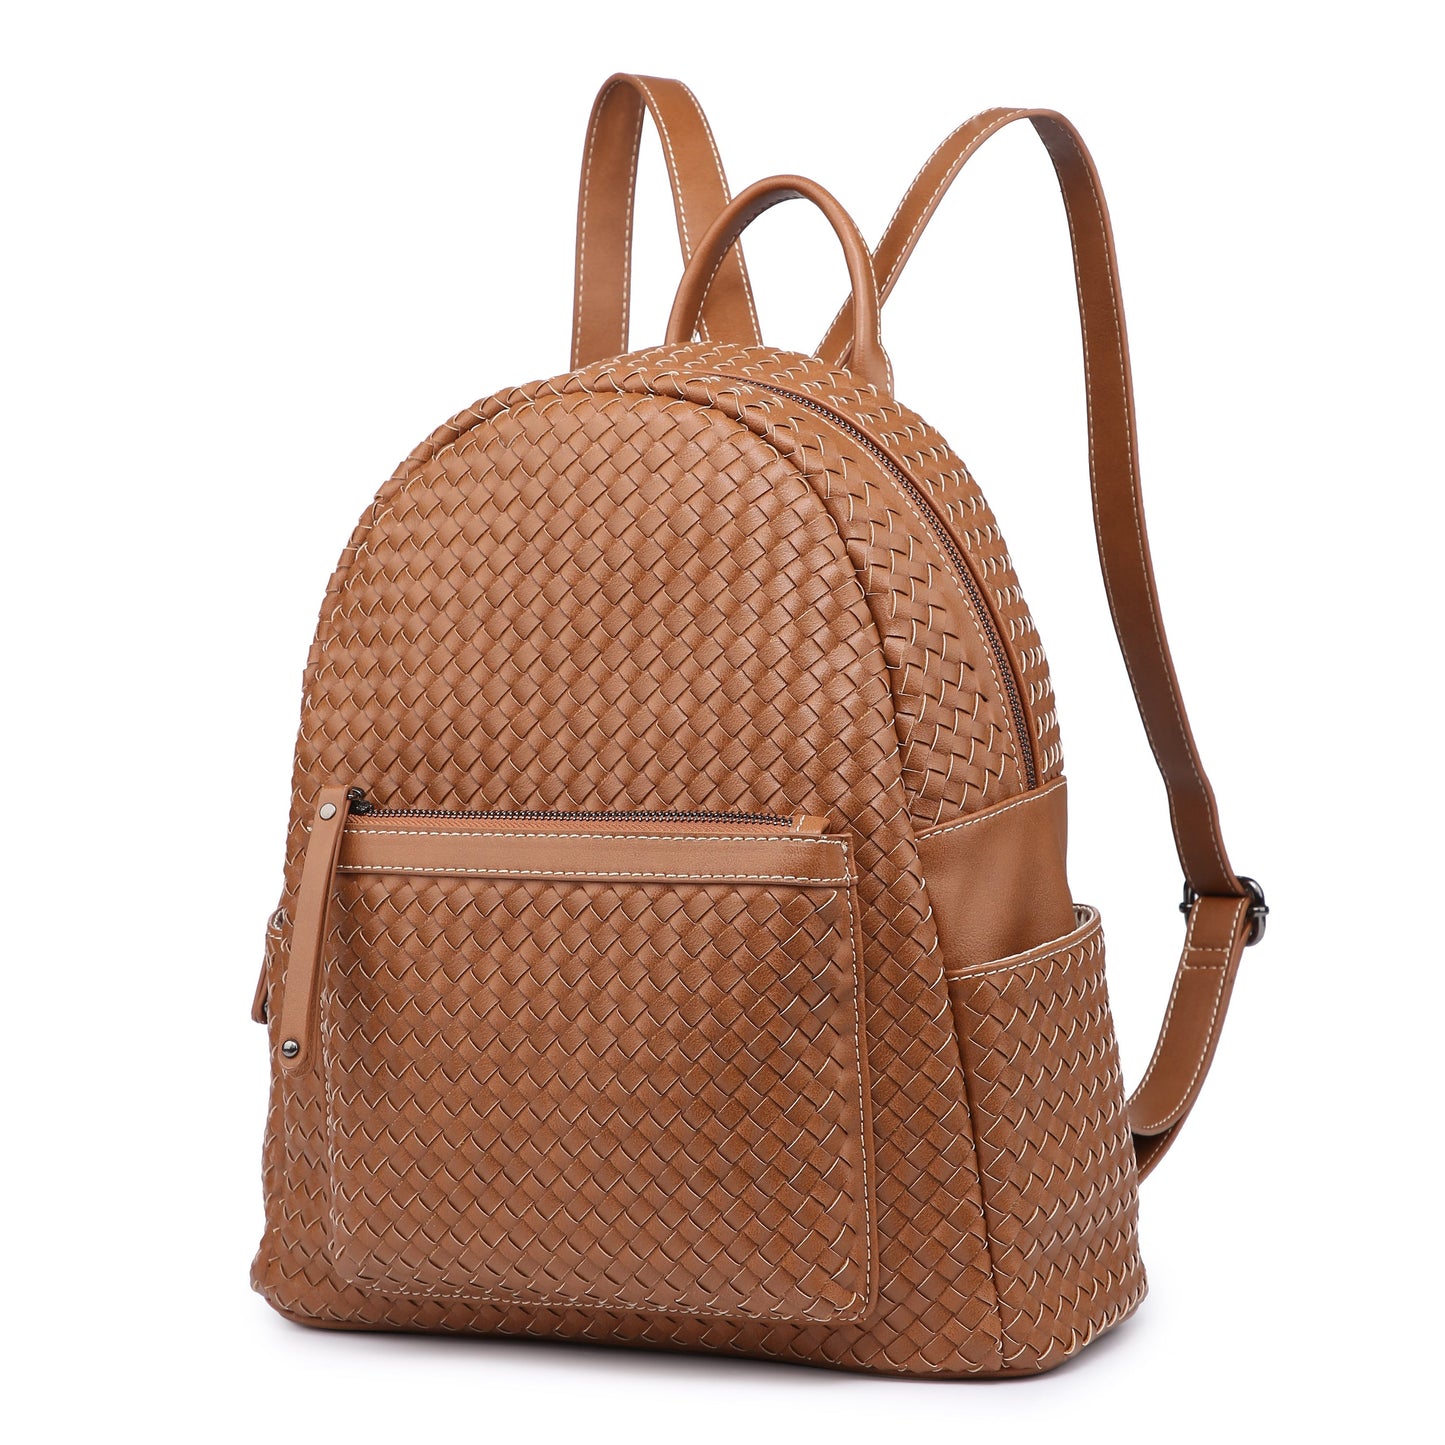 Woven backpack purse for women brown sif2068 BR05